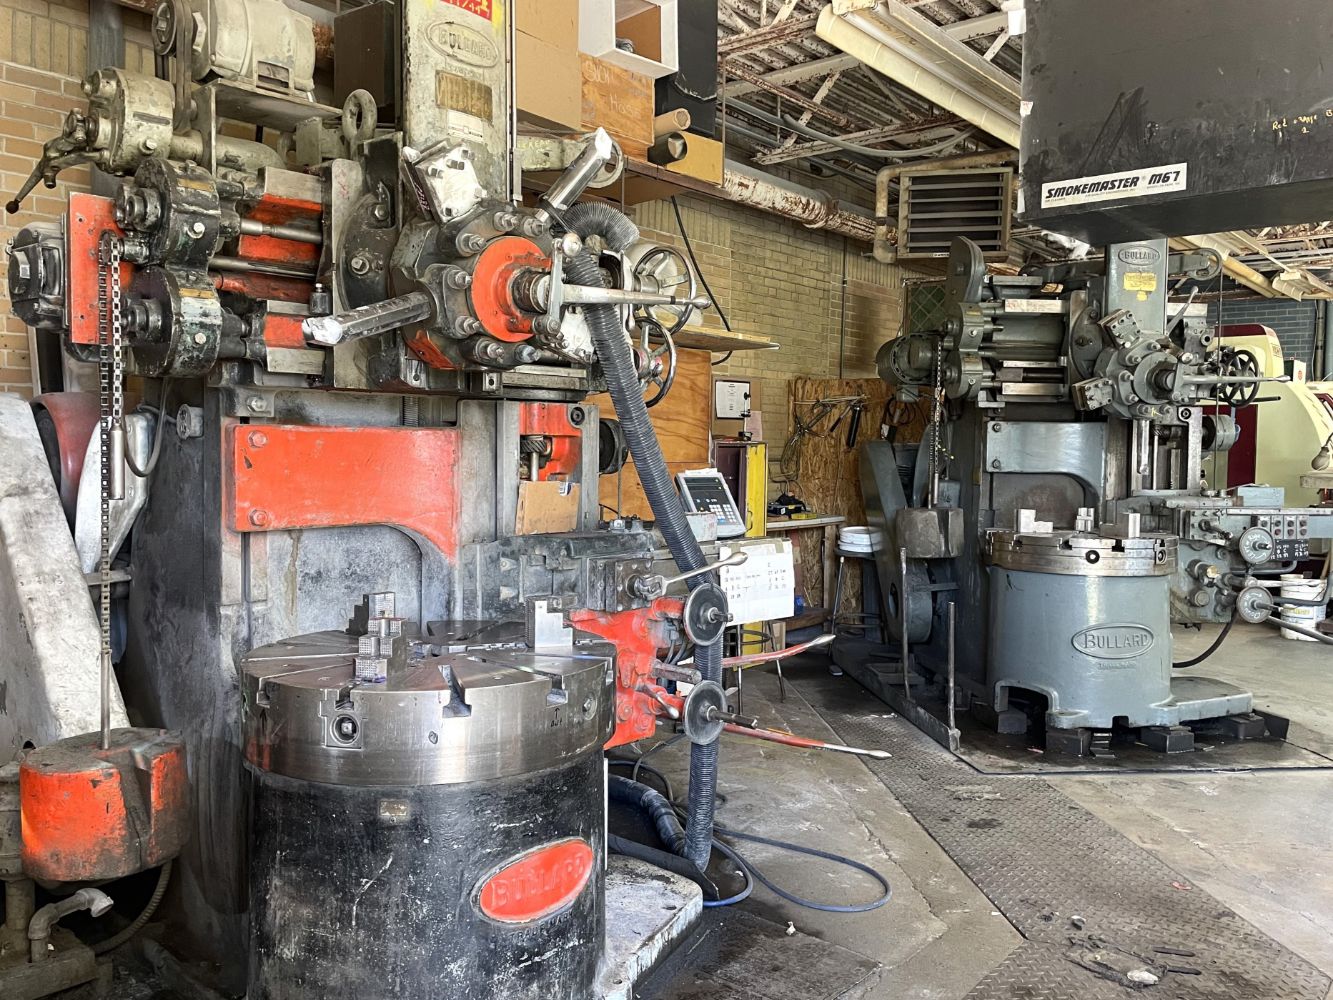 Timed On-Line Auction of a Precision Machining Job Shop